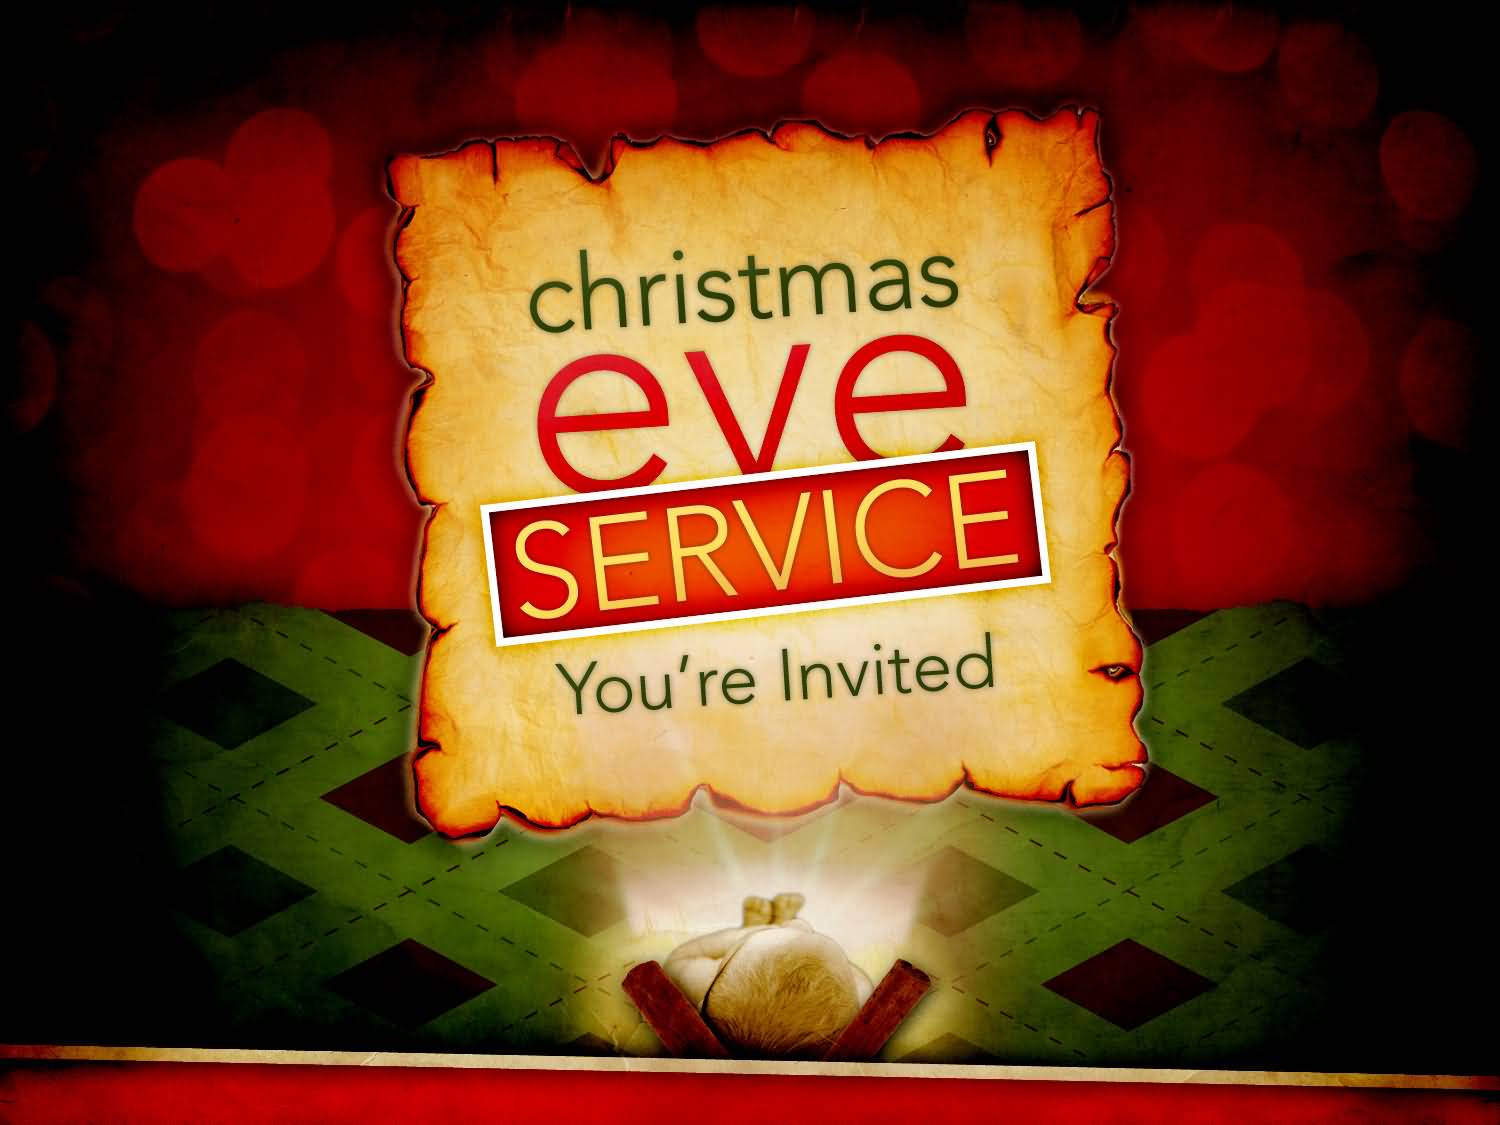 Christmas Eve Service You’re Invited